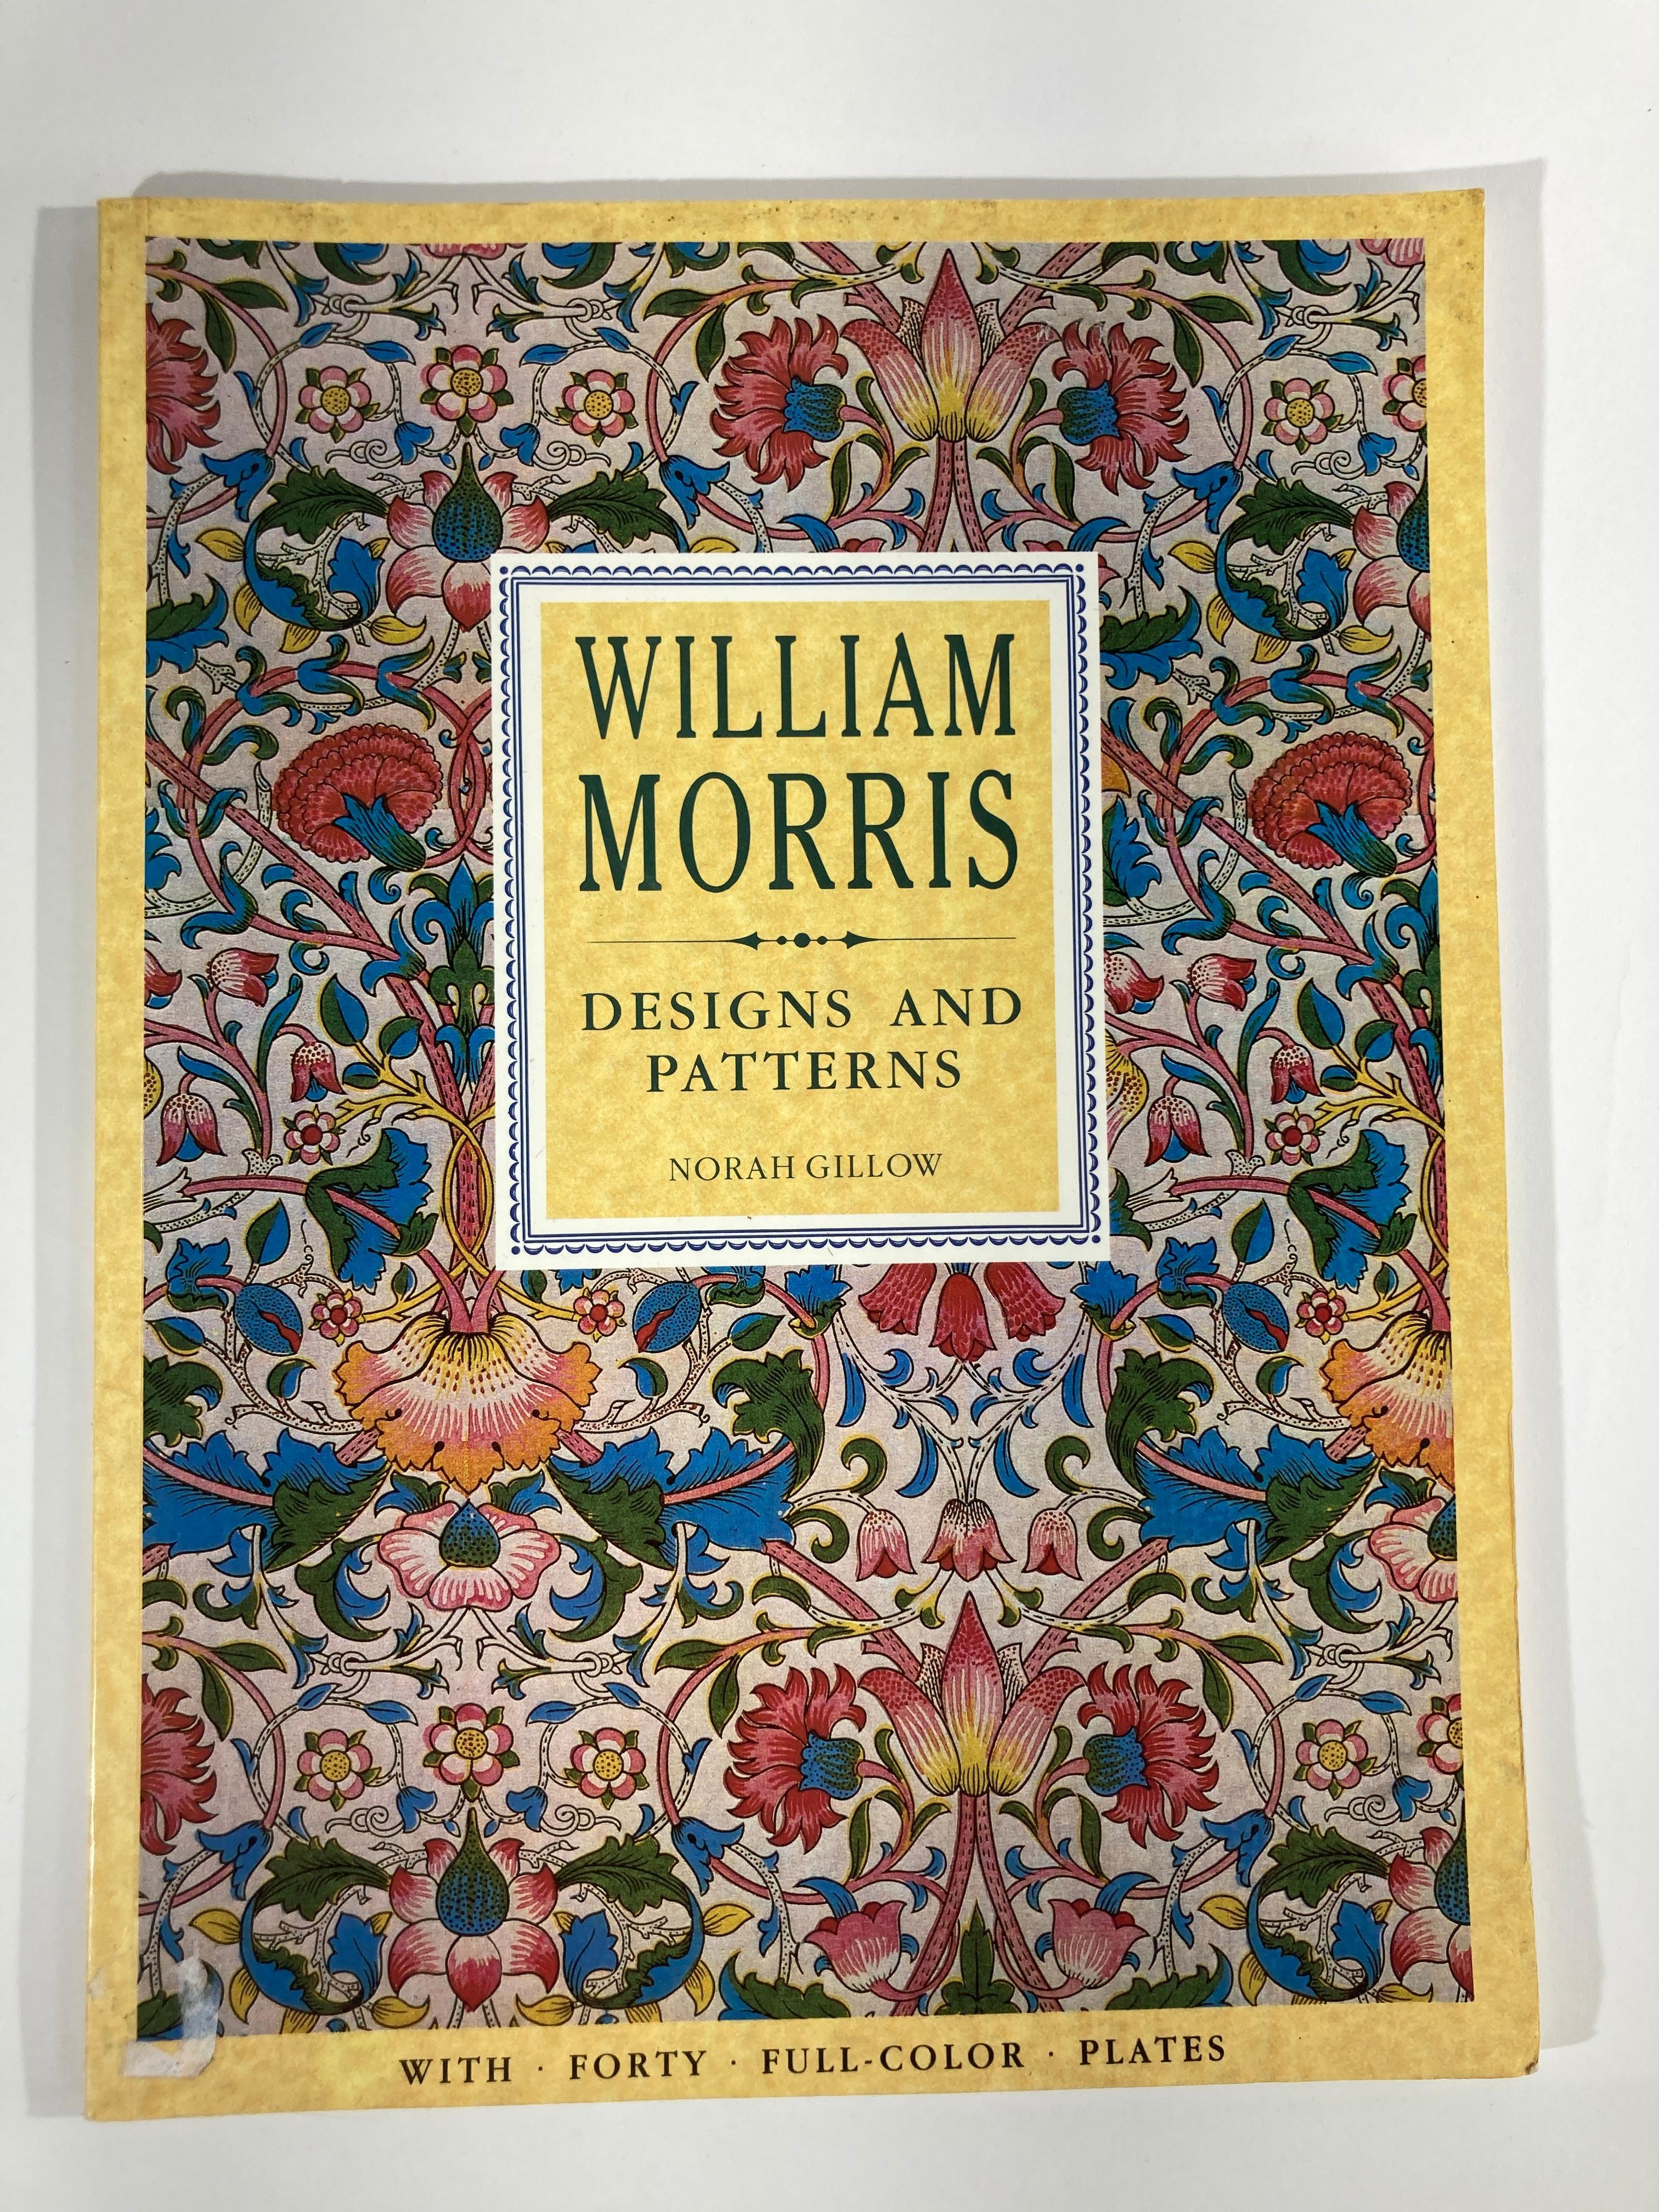 William Morris Full-Color Patterns and Designs.
William Morris by Courier Corporation, Jun 1, 1988 - Design - 41 pages
Defining beauty in art as the result of man's pleasure in his work, the noted English poet, designer, craftsman and pioneer